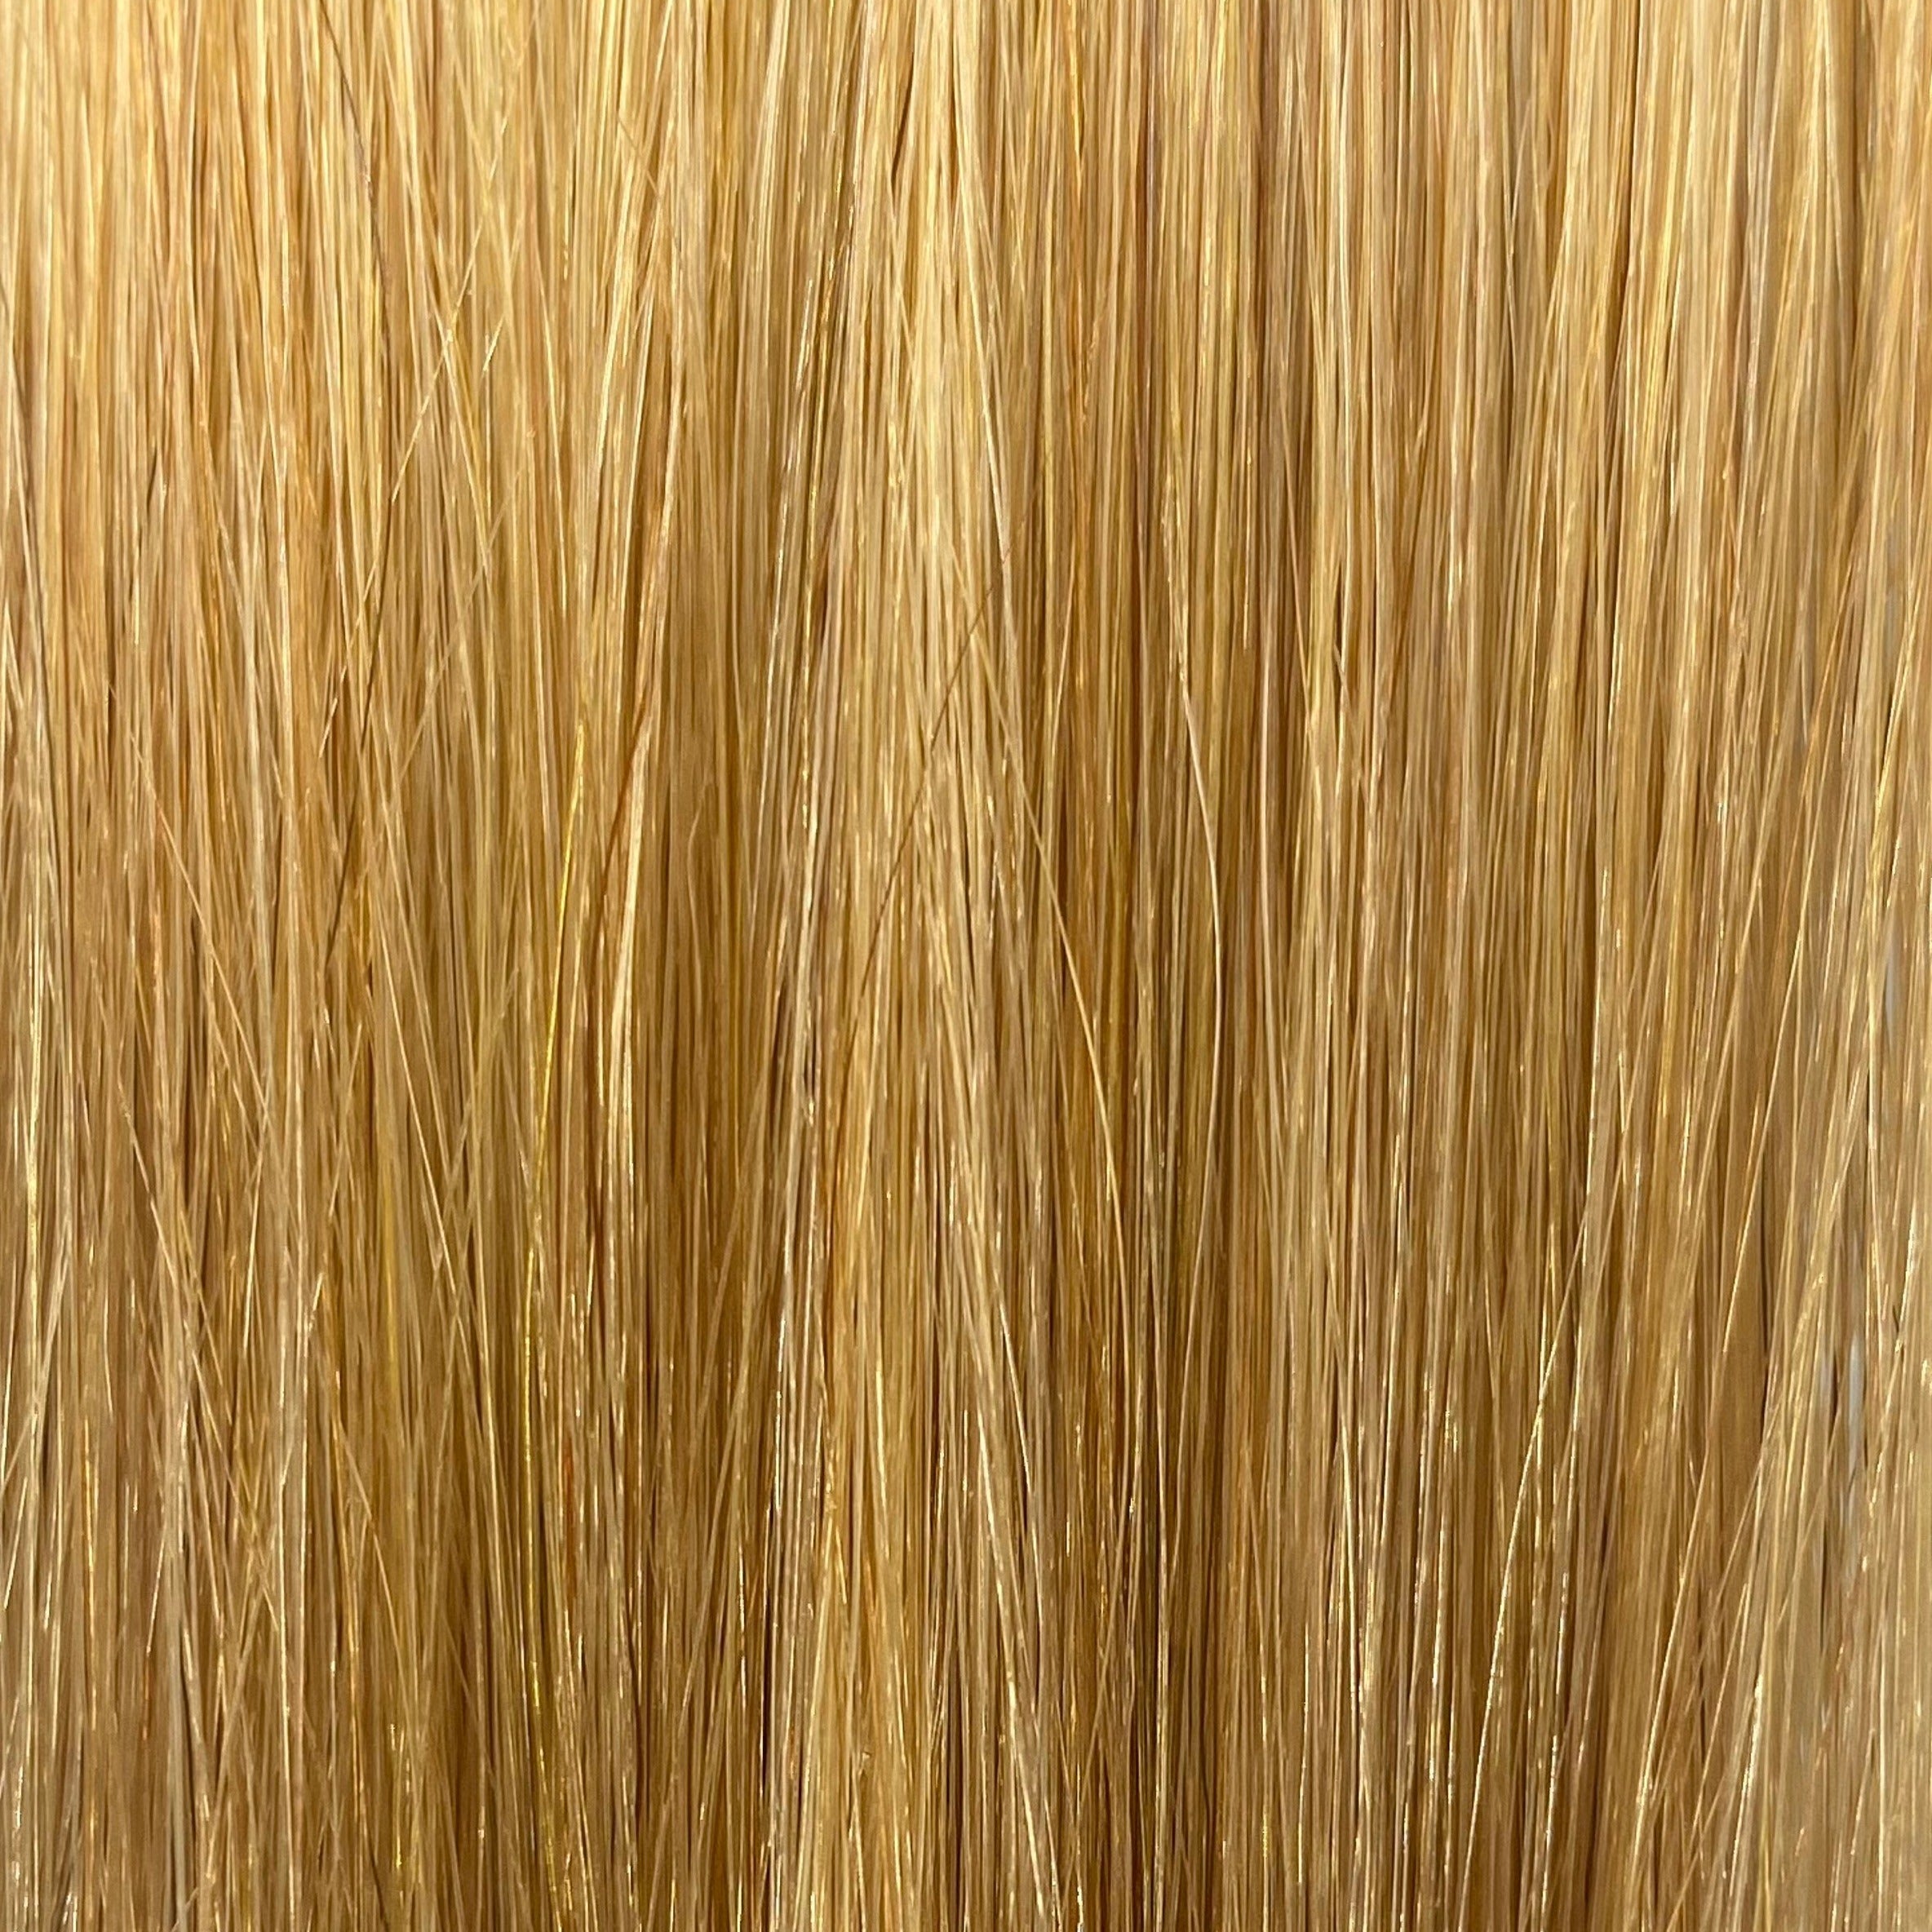 FUSION #DB3 GOLDEN BLONDE 50CM/ 20 INCHES  -  20 GRAMS